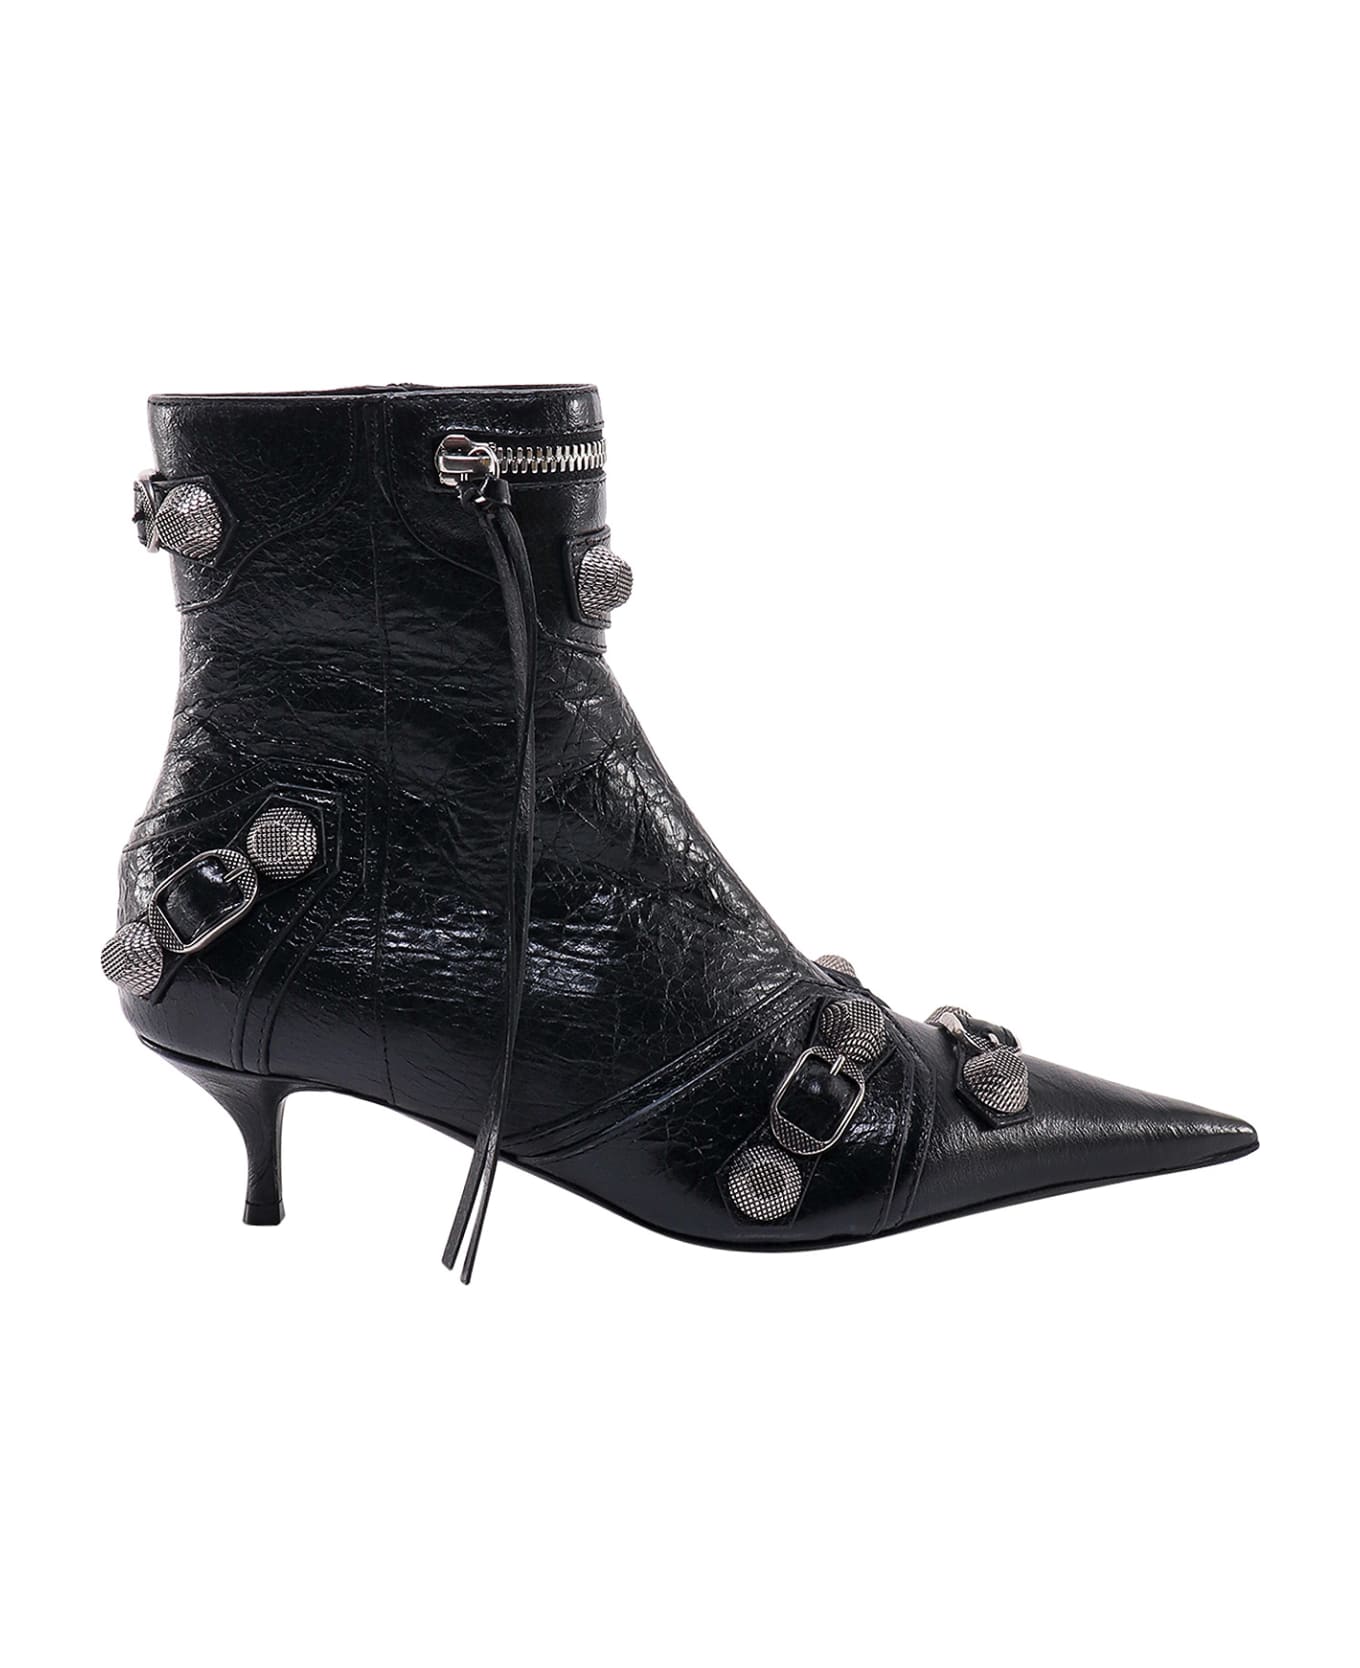 Balenciaga Low Heels Ankle Boots In Black Leather - Black ブーツ